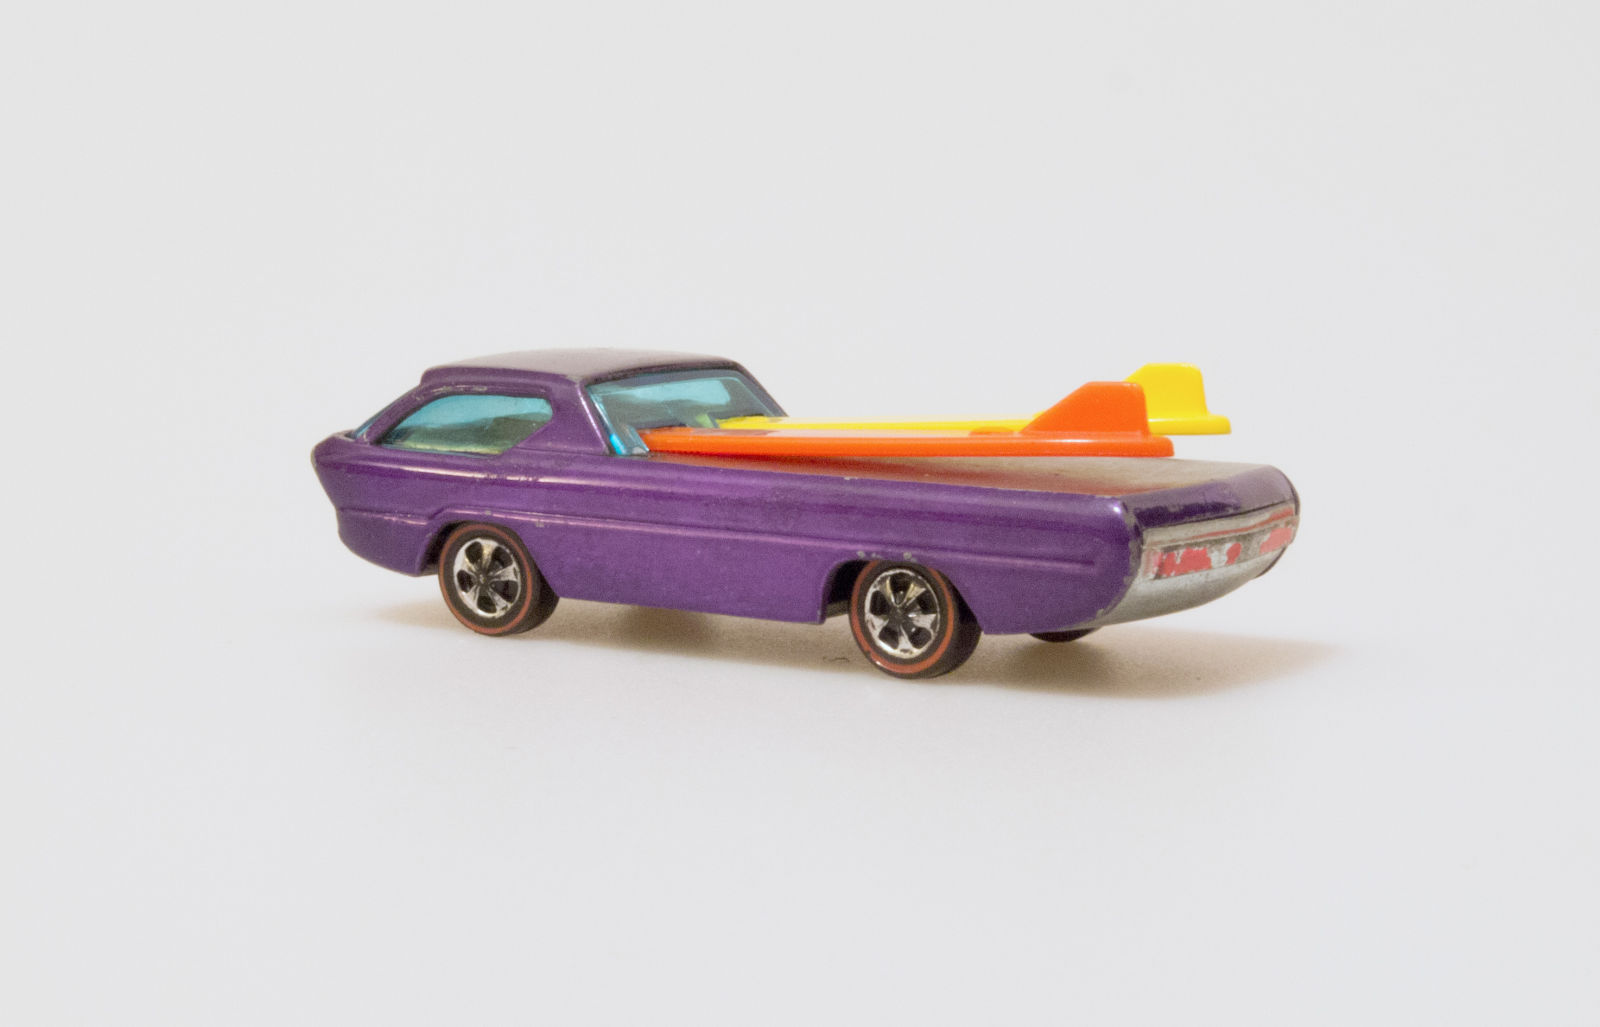 My favorite of the original 16: Deora (with what I believe are recreation surfboards... ah well...)